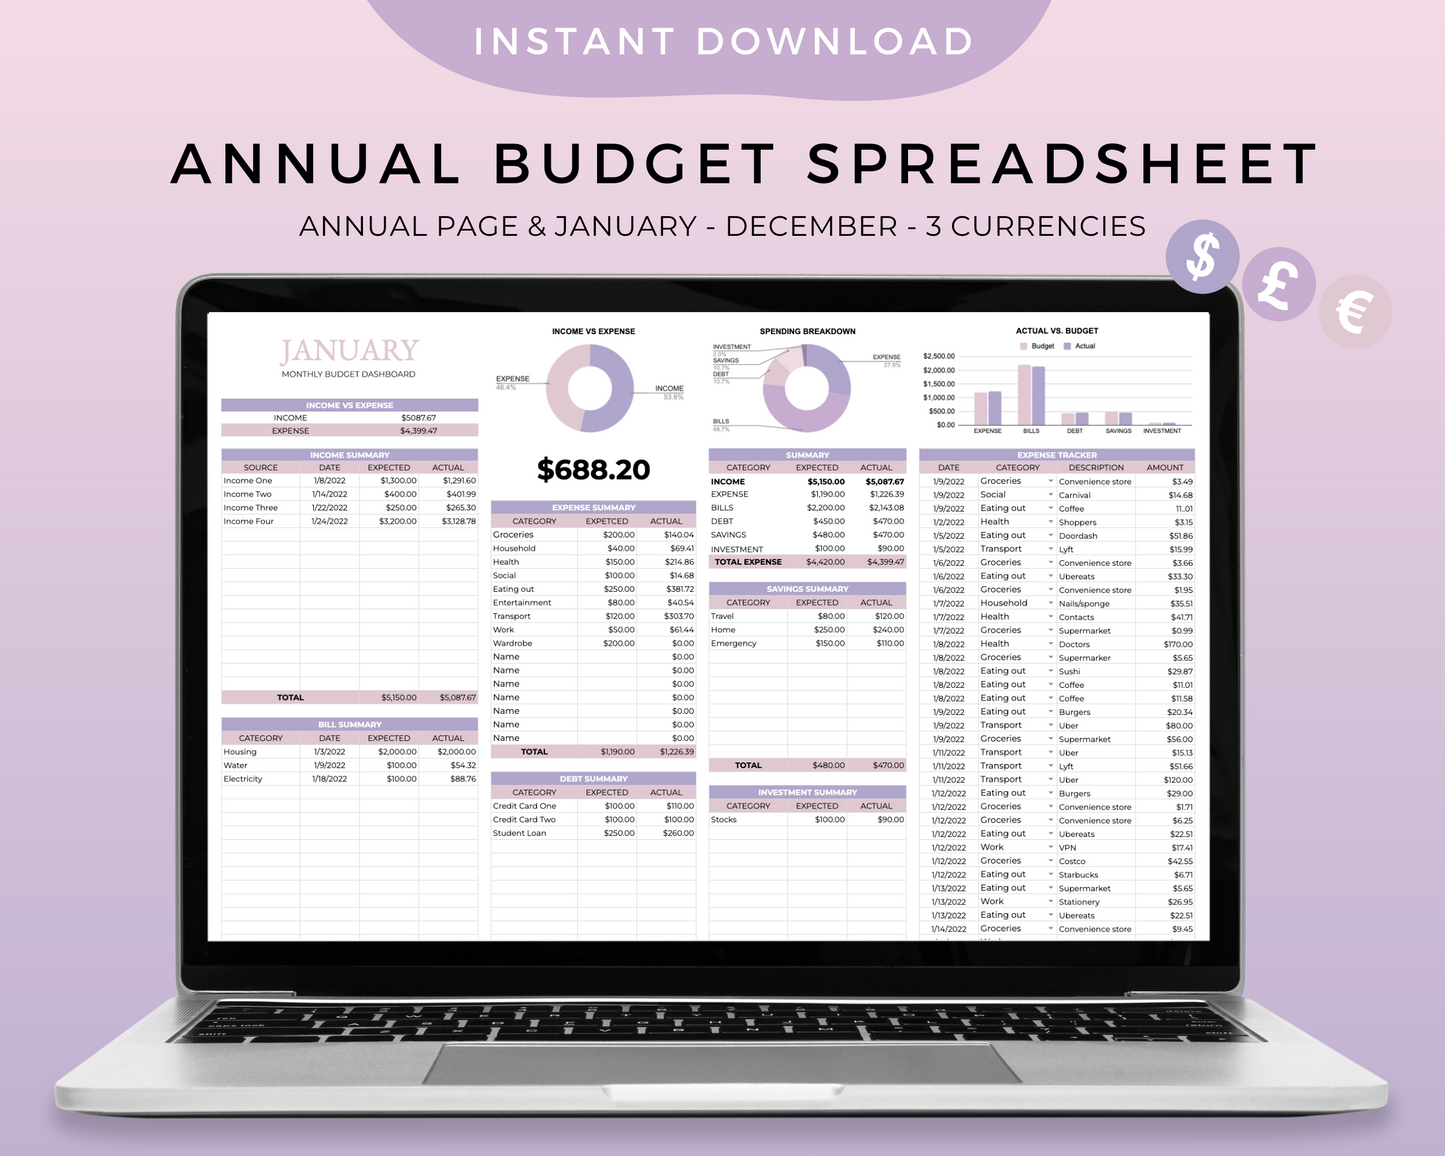 Annual Budget Spreadsheet - Cotton Candy